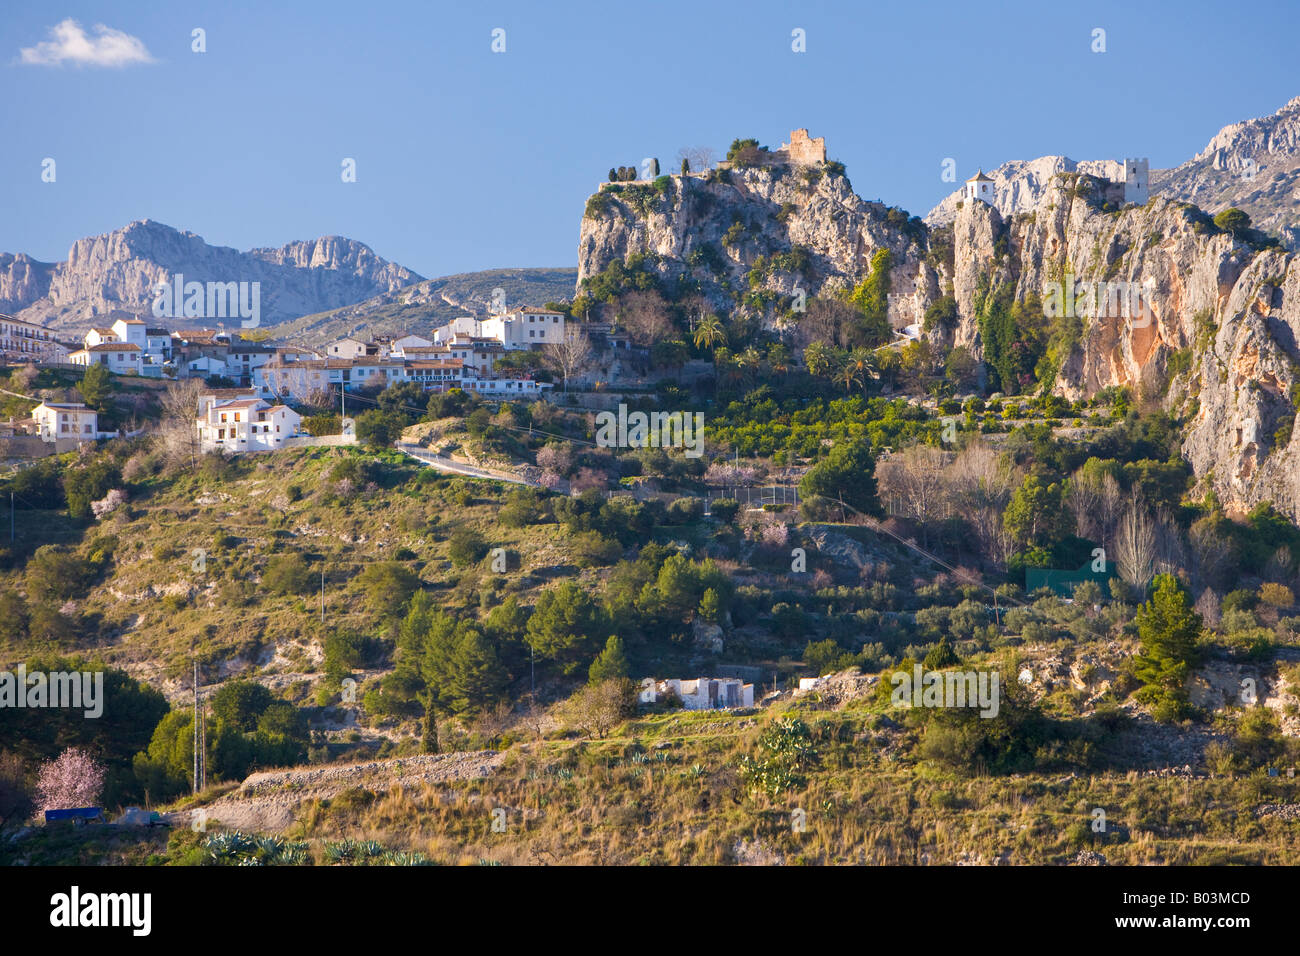 Ruins of Castell de Guadalest, Castle of Guadalest, and the white washed church belfry in the town of Guadalest Stock Photo